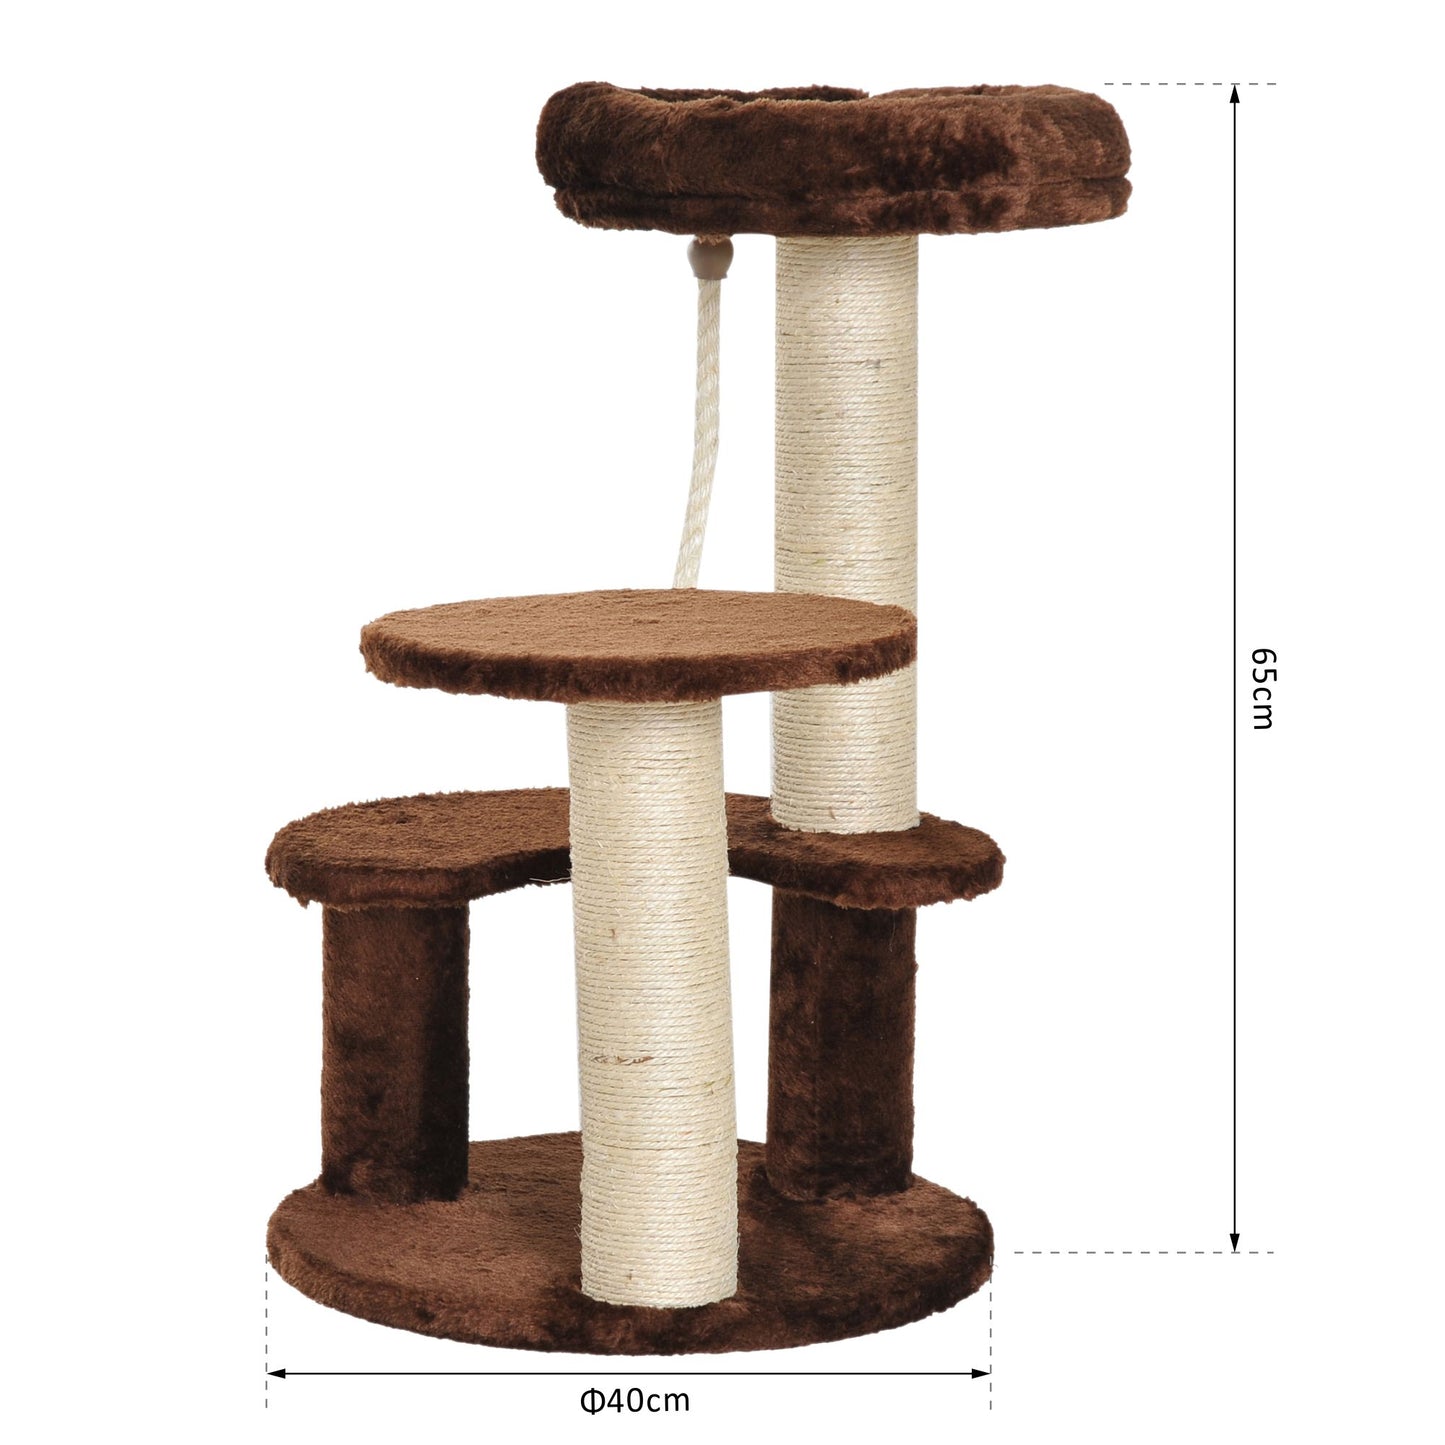 PawHut 65 cm Cat Tree for Indoor Cats Kitty Scratcher Kitten Activity Center Scratching Post Playhouse 2 Perch w/ Hanging Sisal Rope Brown